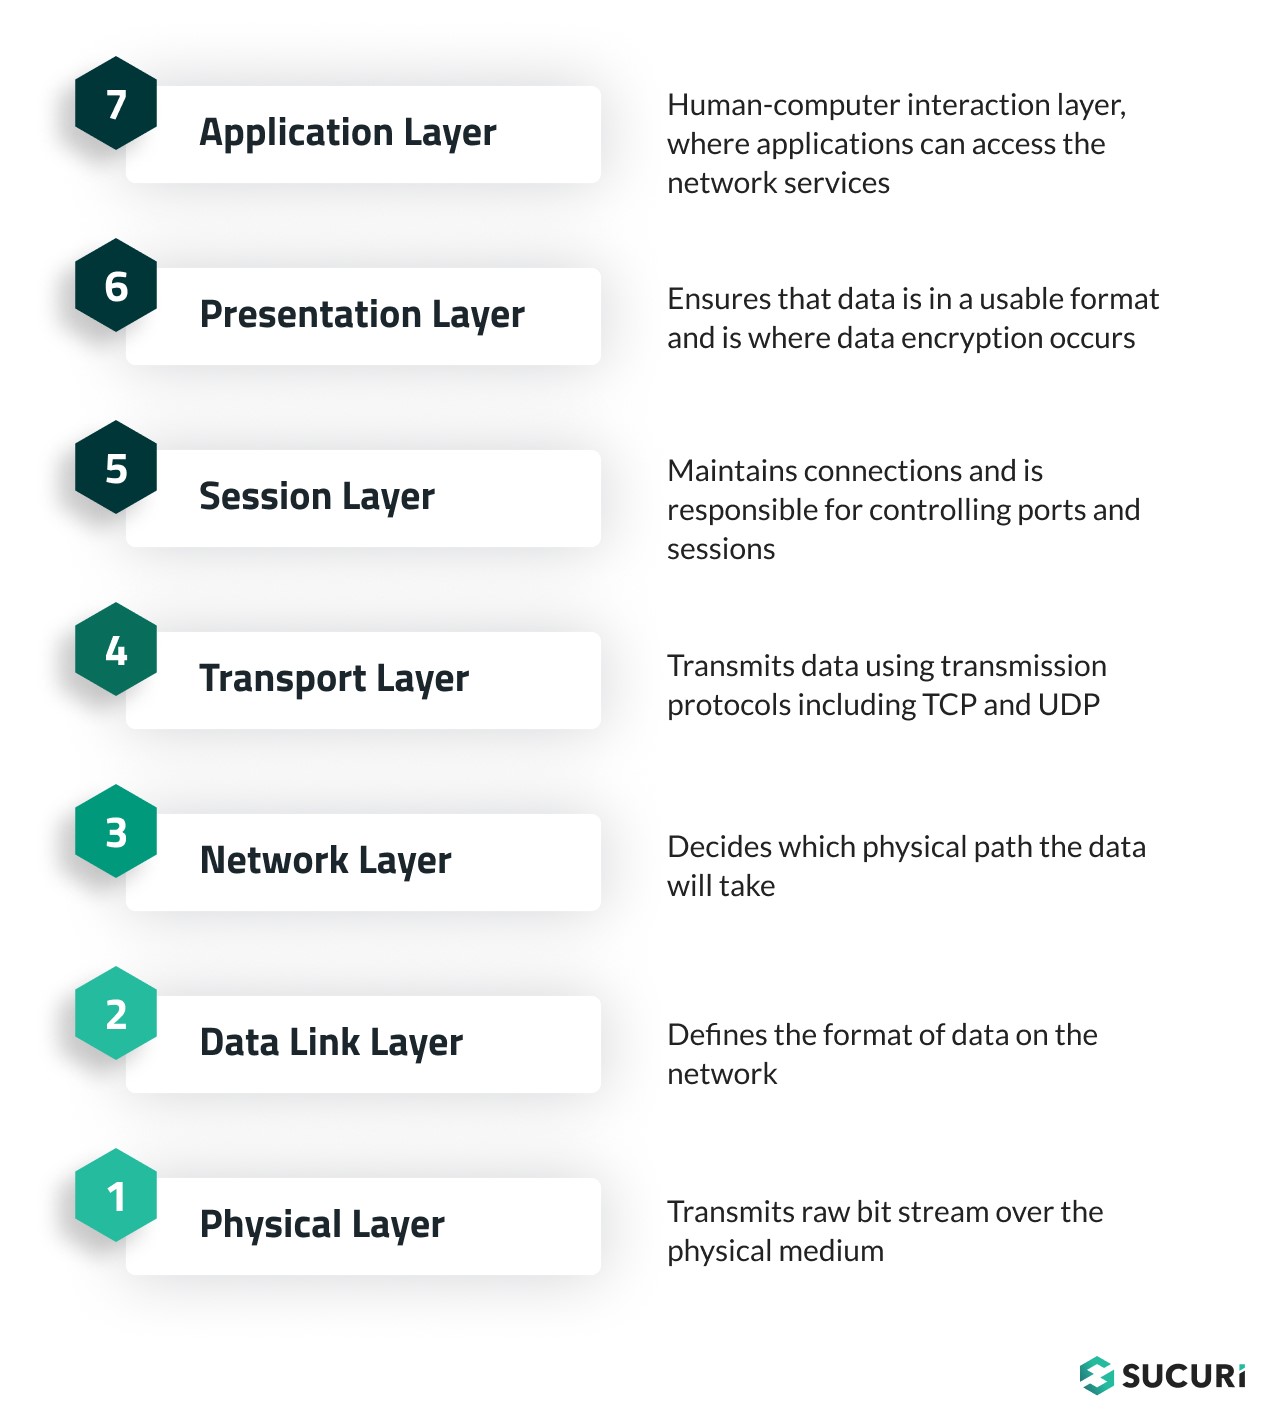 OSI Model Application Layers 1 to 7 for HTTP SSL port connection